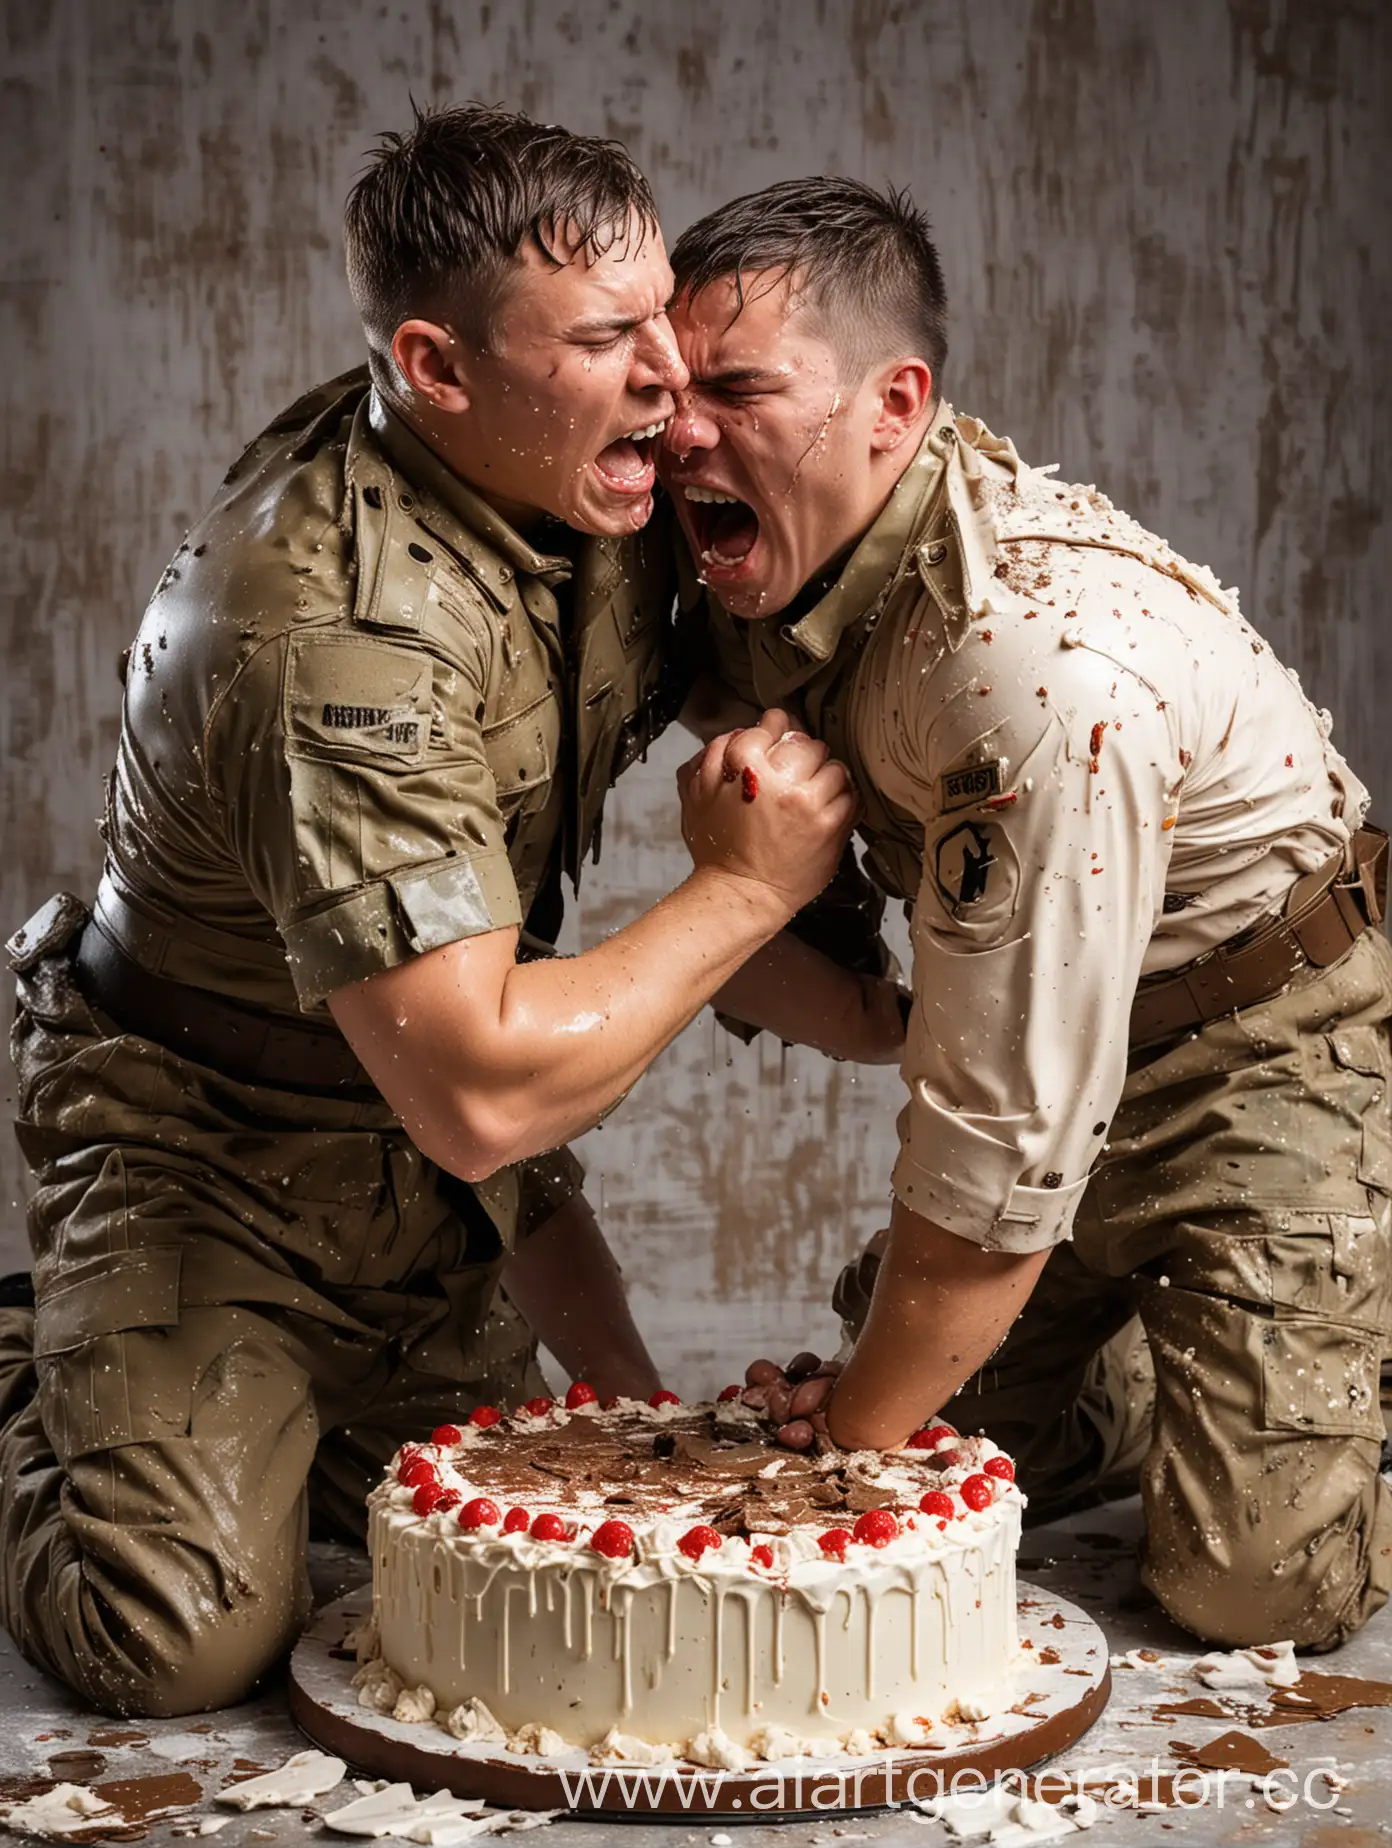 Soldiers-in-Messy-Cake-Fight-Uniforms-Covered-in-Cream-and-Cake